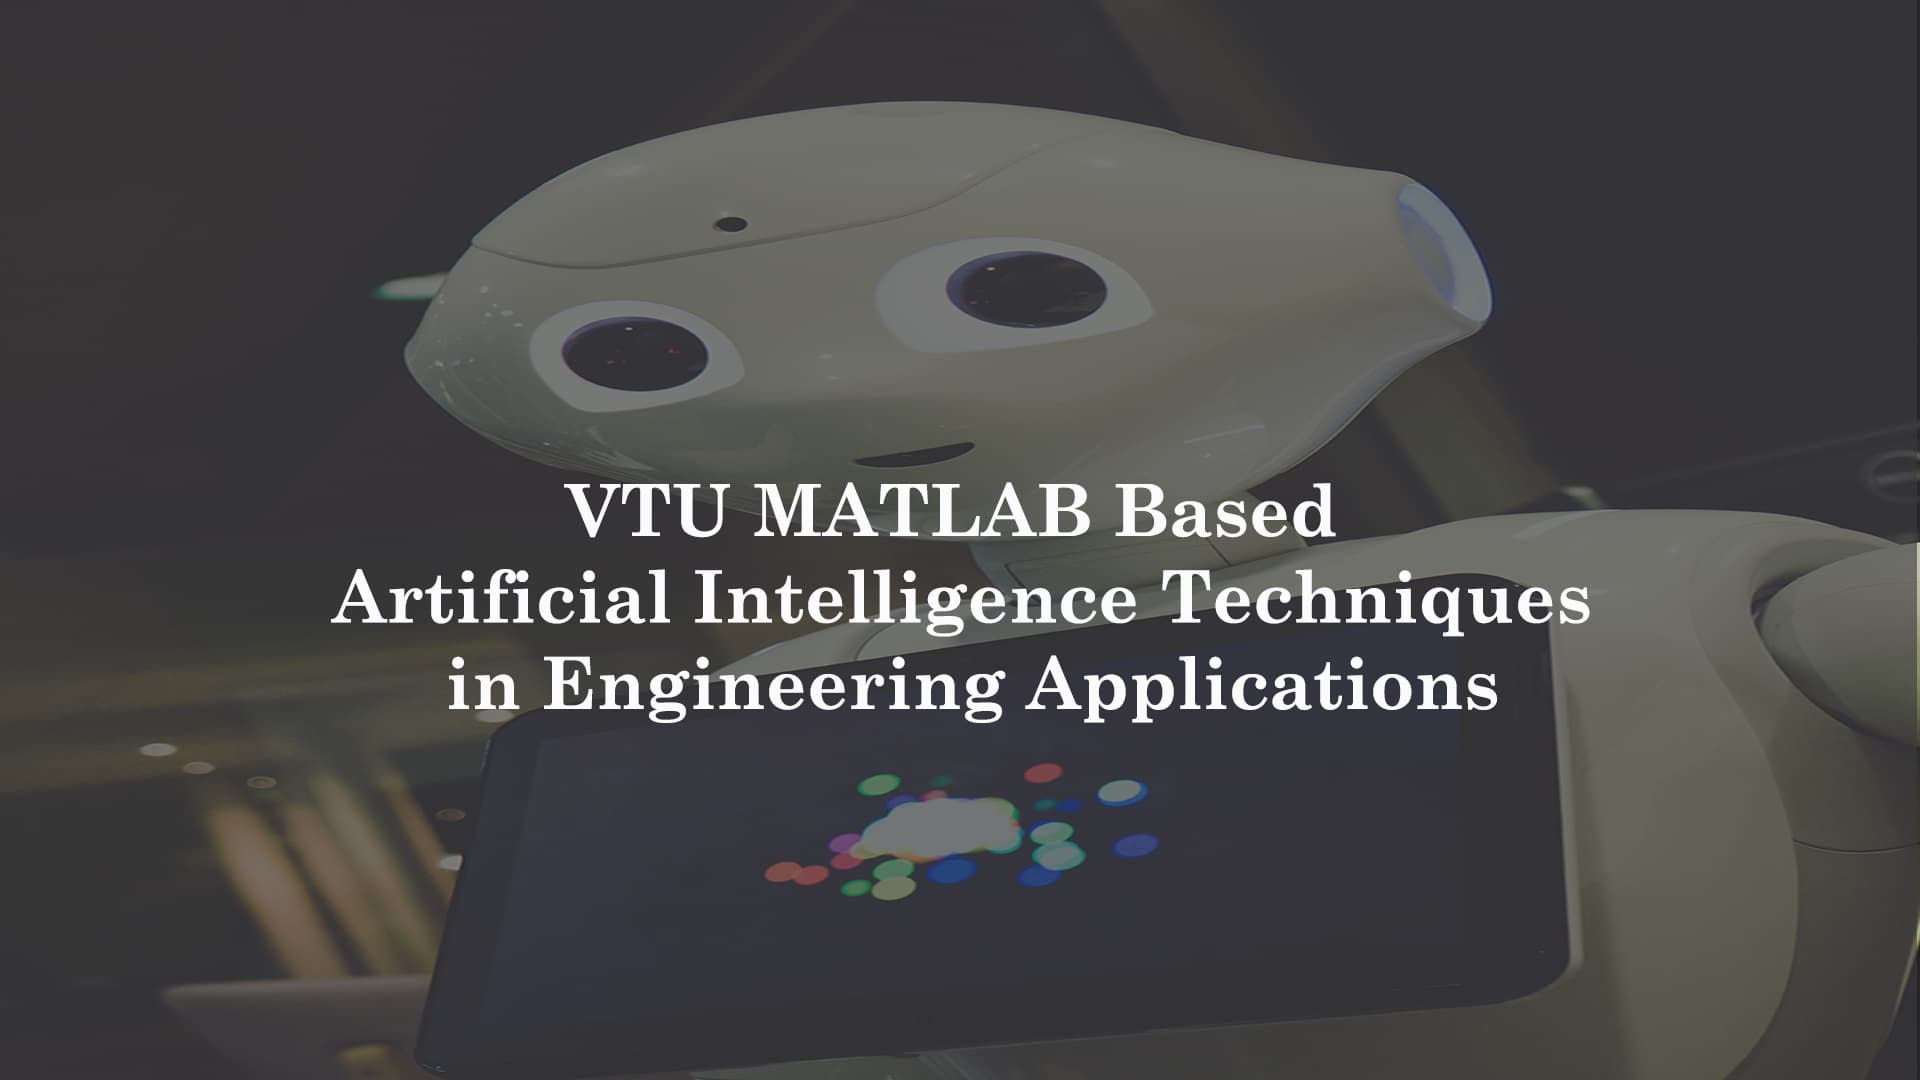 VTU MATLAB Based Artificial Intelligence Techniques in Engineering Applications